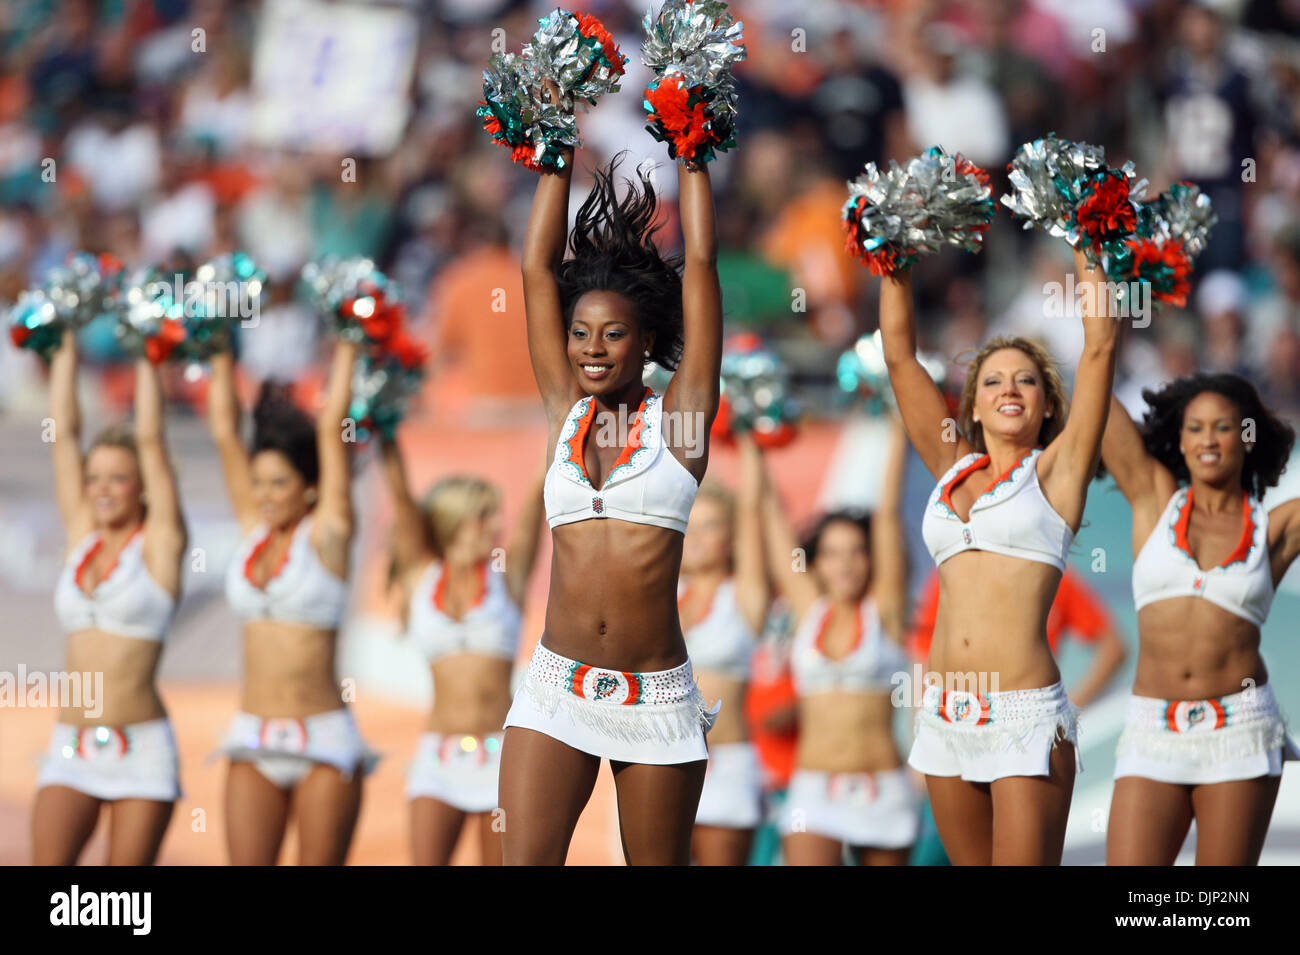 112308 spt dolphins--ÃŠ0058902A--Staff Photo by Allen Eyestone/The Palm Beach Post...Miami Gardens, FL..Dolphin Stadium..New England Patriots at Miami Dolphins NFL football...The Dolphin cheerleaders perform. (Credit Image: © The Palm Beach Post/ZUMA Press) Stock Photo